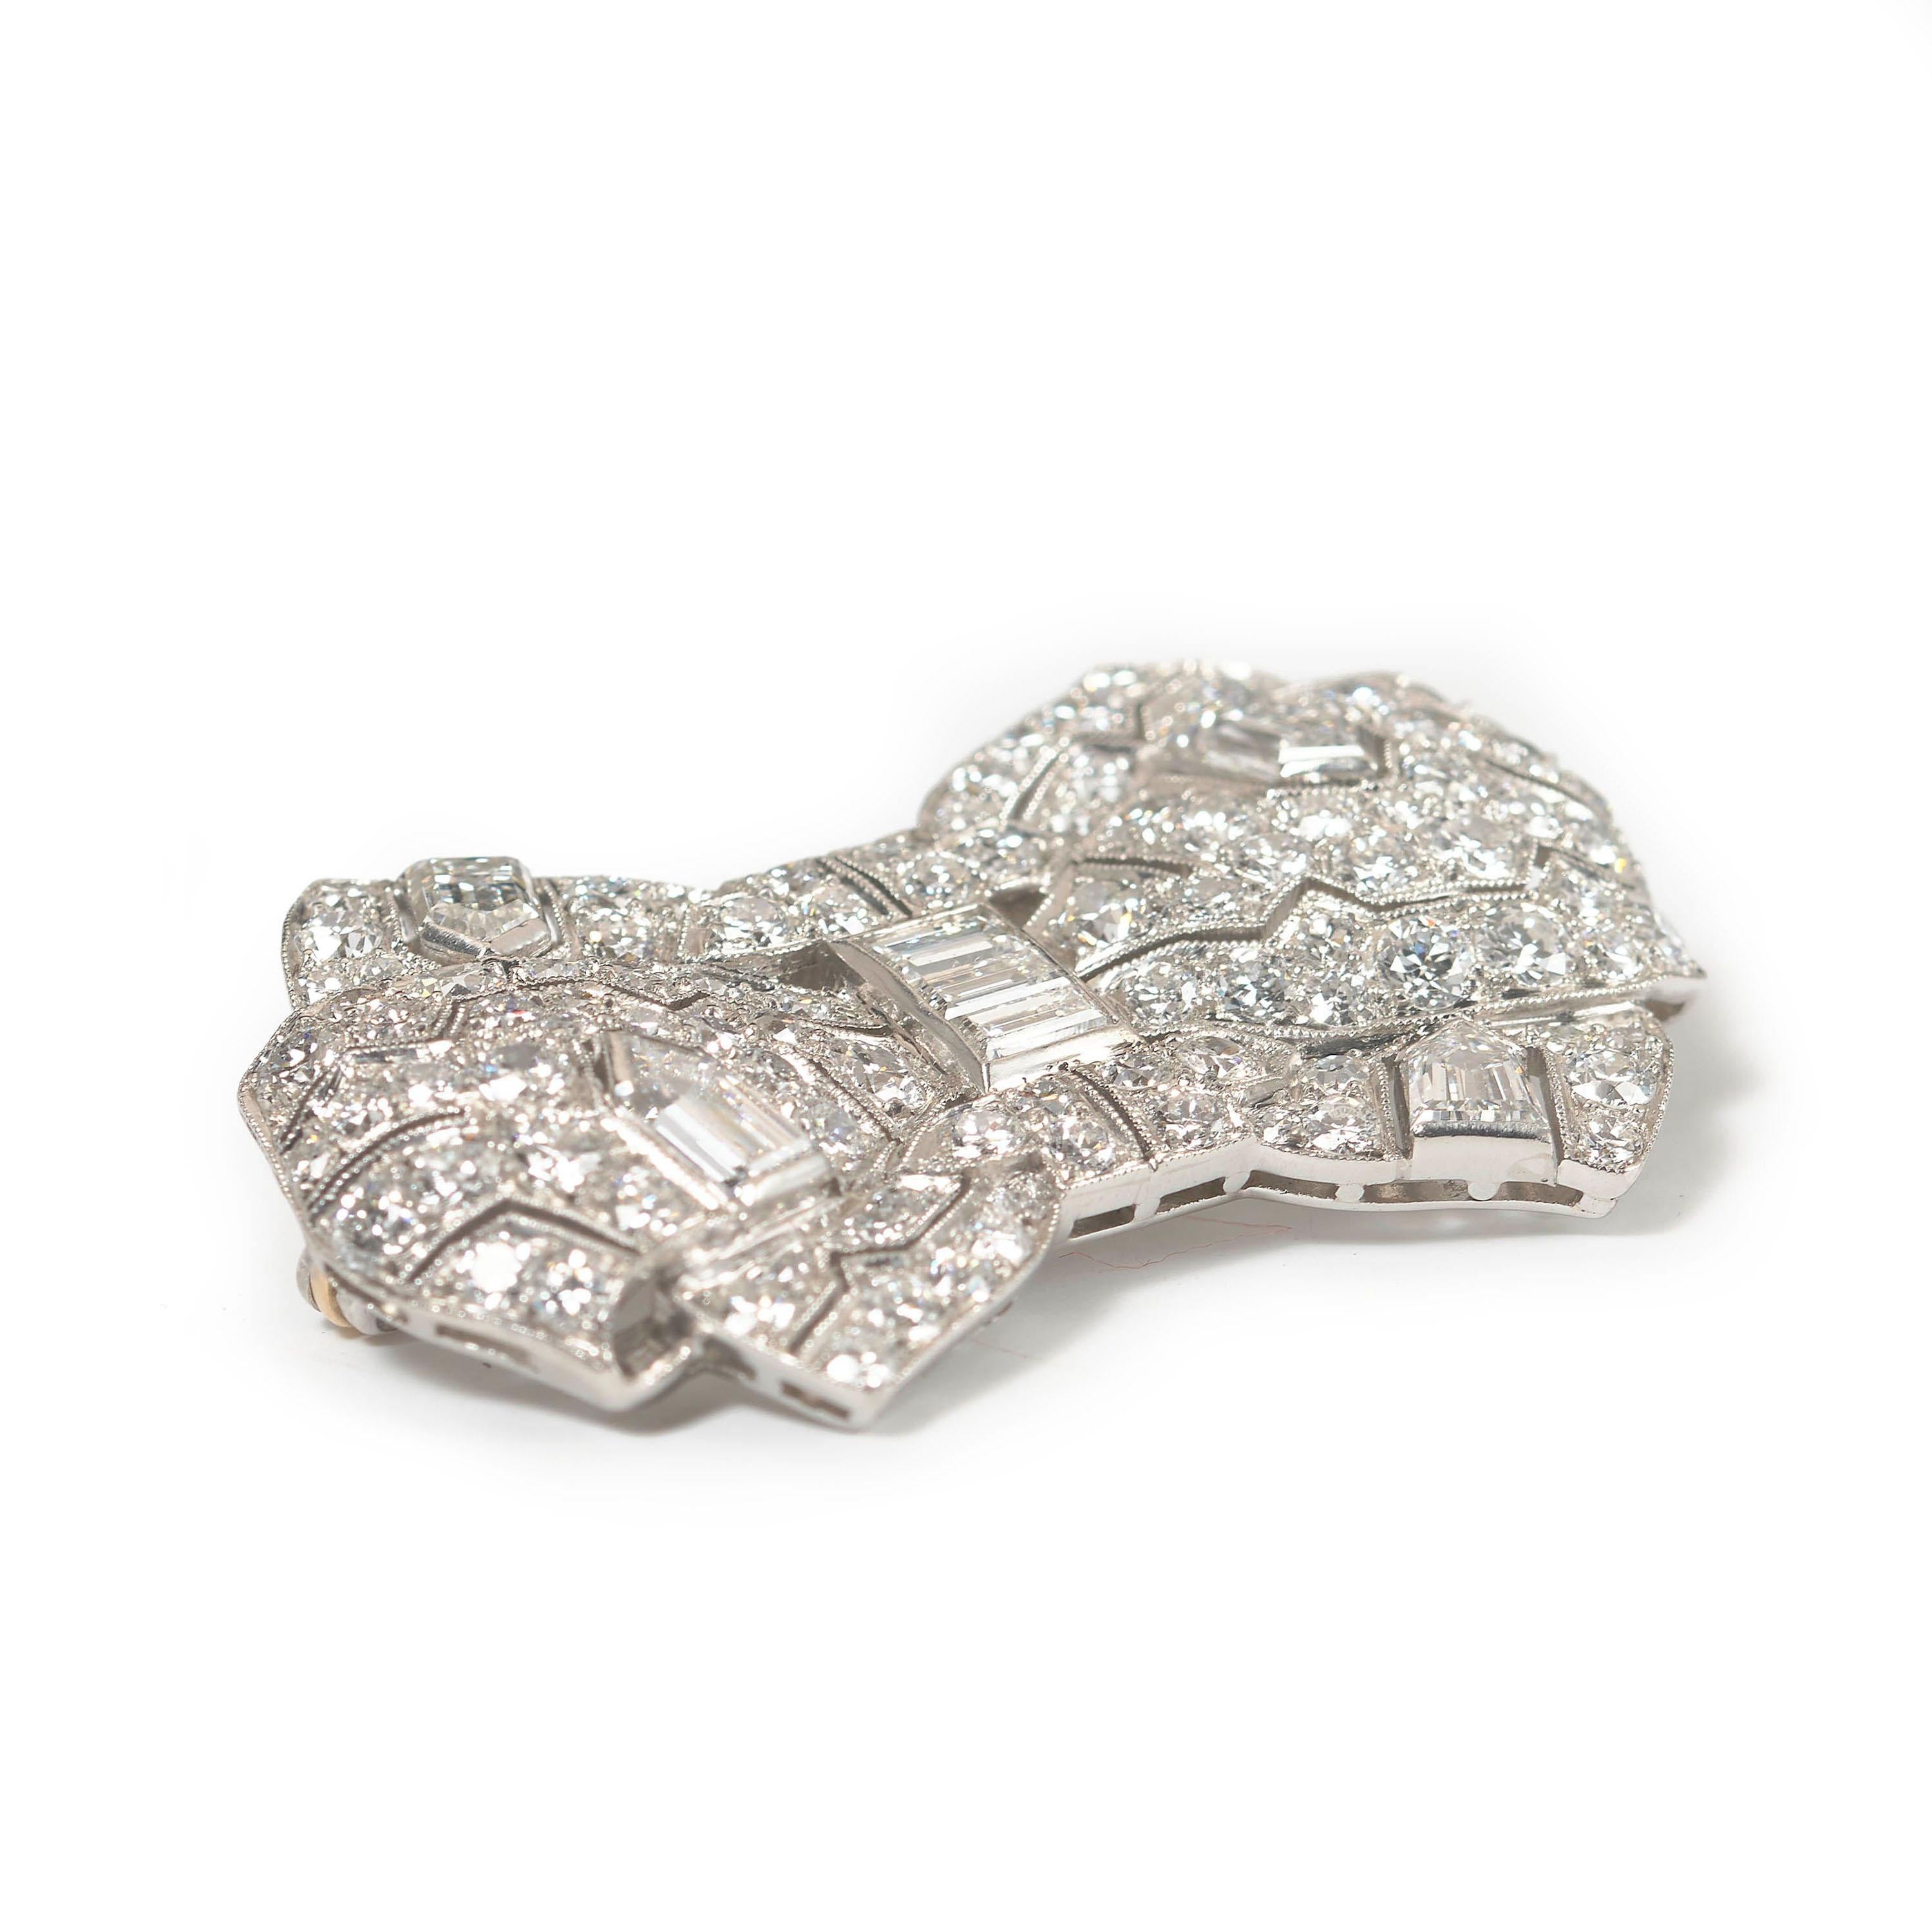 A Tiffany Art Deco diamond and platinum bow brooch, with geometric openwork decoration, set with round brilliant-cut diamonds, in pavé grain settings, baguette and bullet-cut diamonds, in rub over settings, with millegrain edges, mounted in